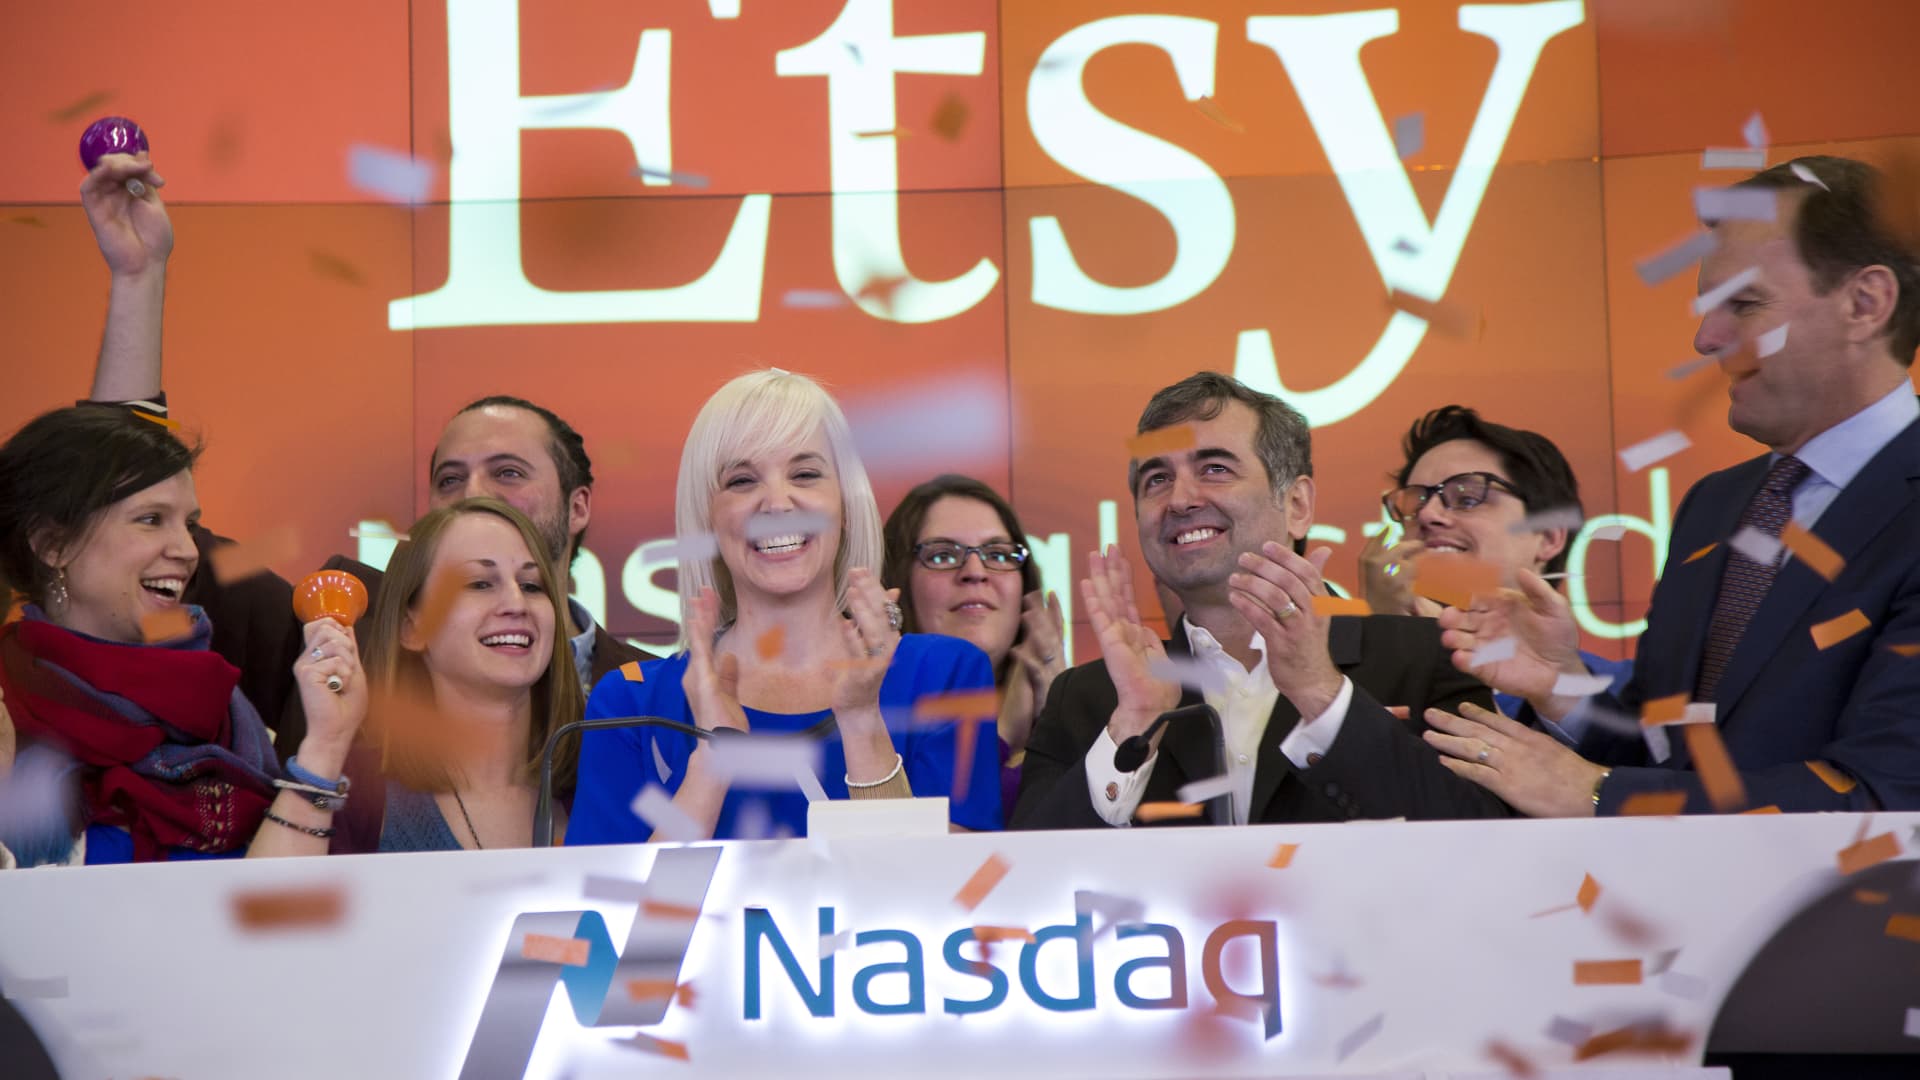 Executives of Etsy applaud as they open the Nasdaq MarketSite ahead of Etsy's initial public offering in New York, April 16, 2015.